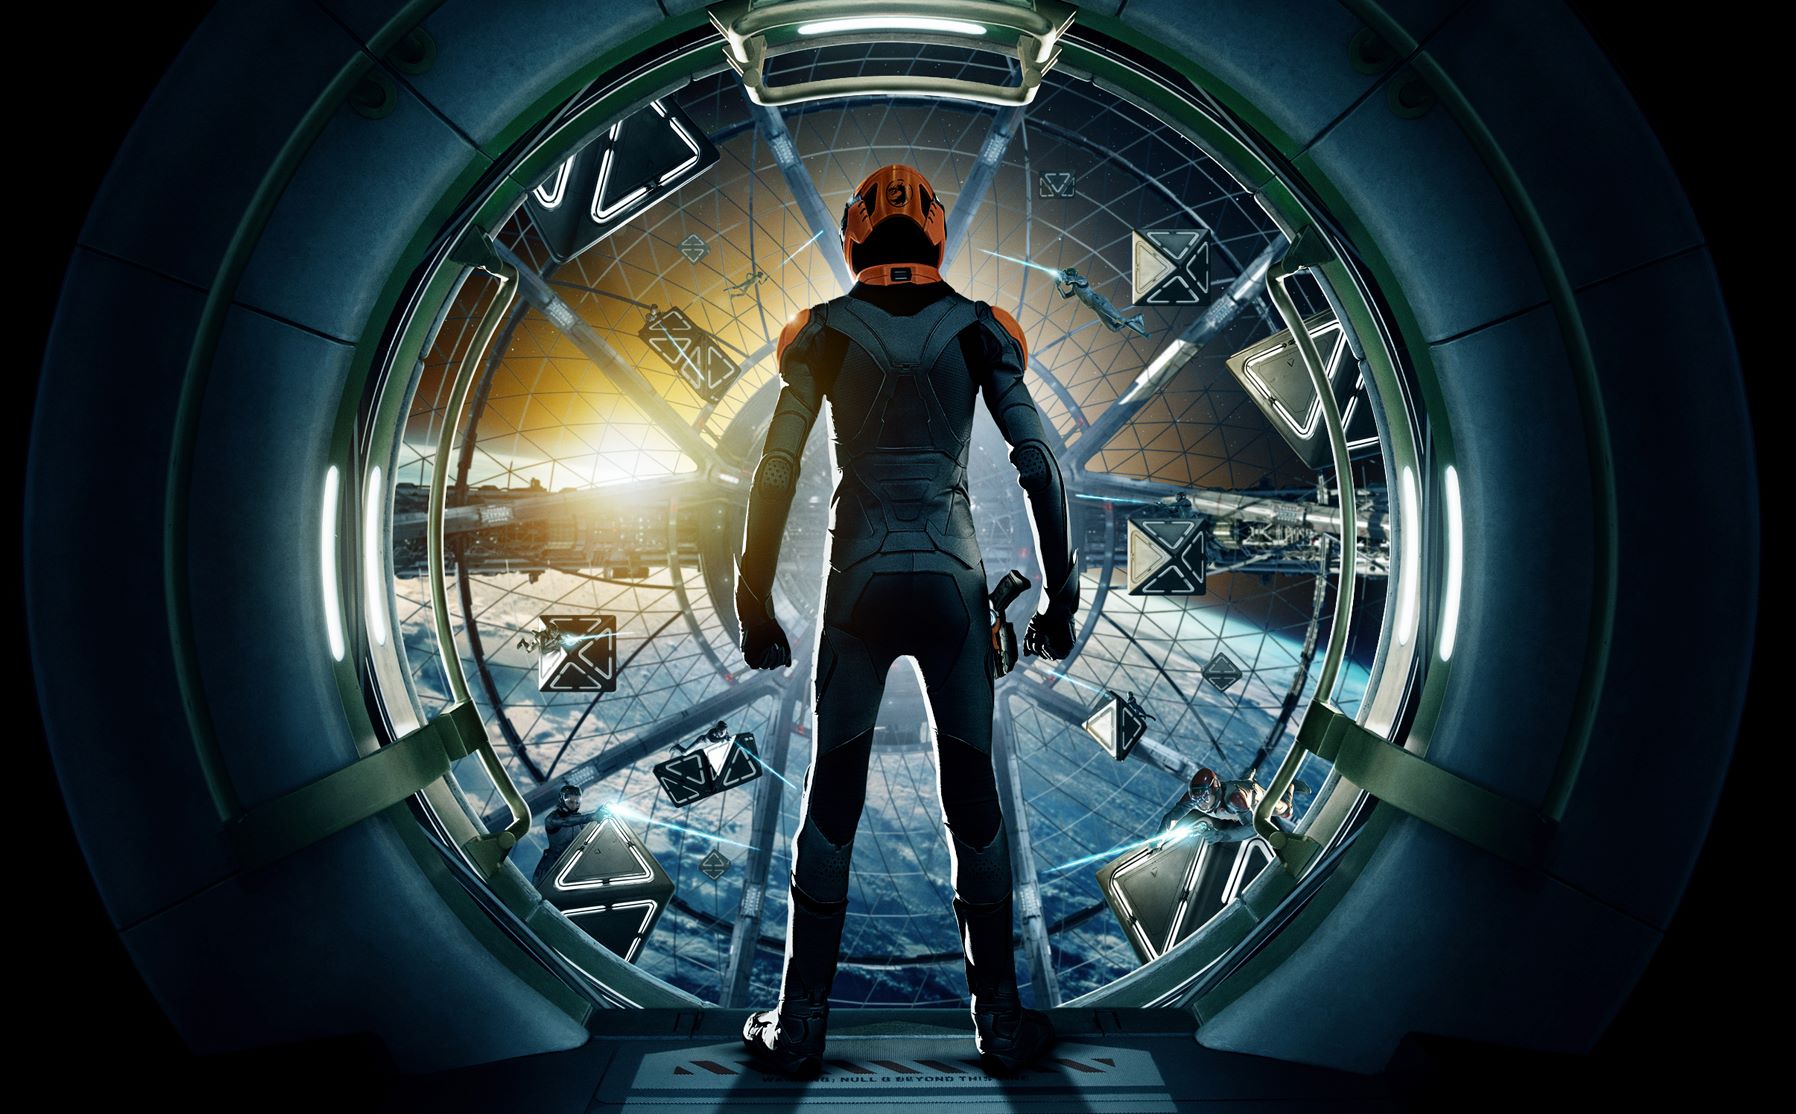 Is Lionsgate’s ‘Ender’s Game’ a One-and-Done?